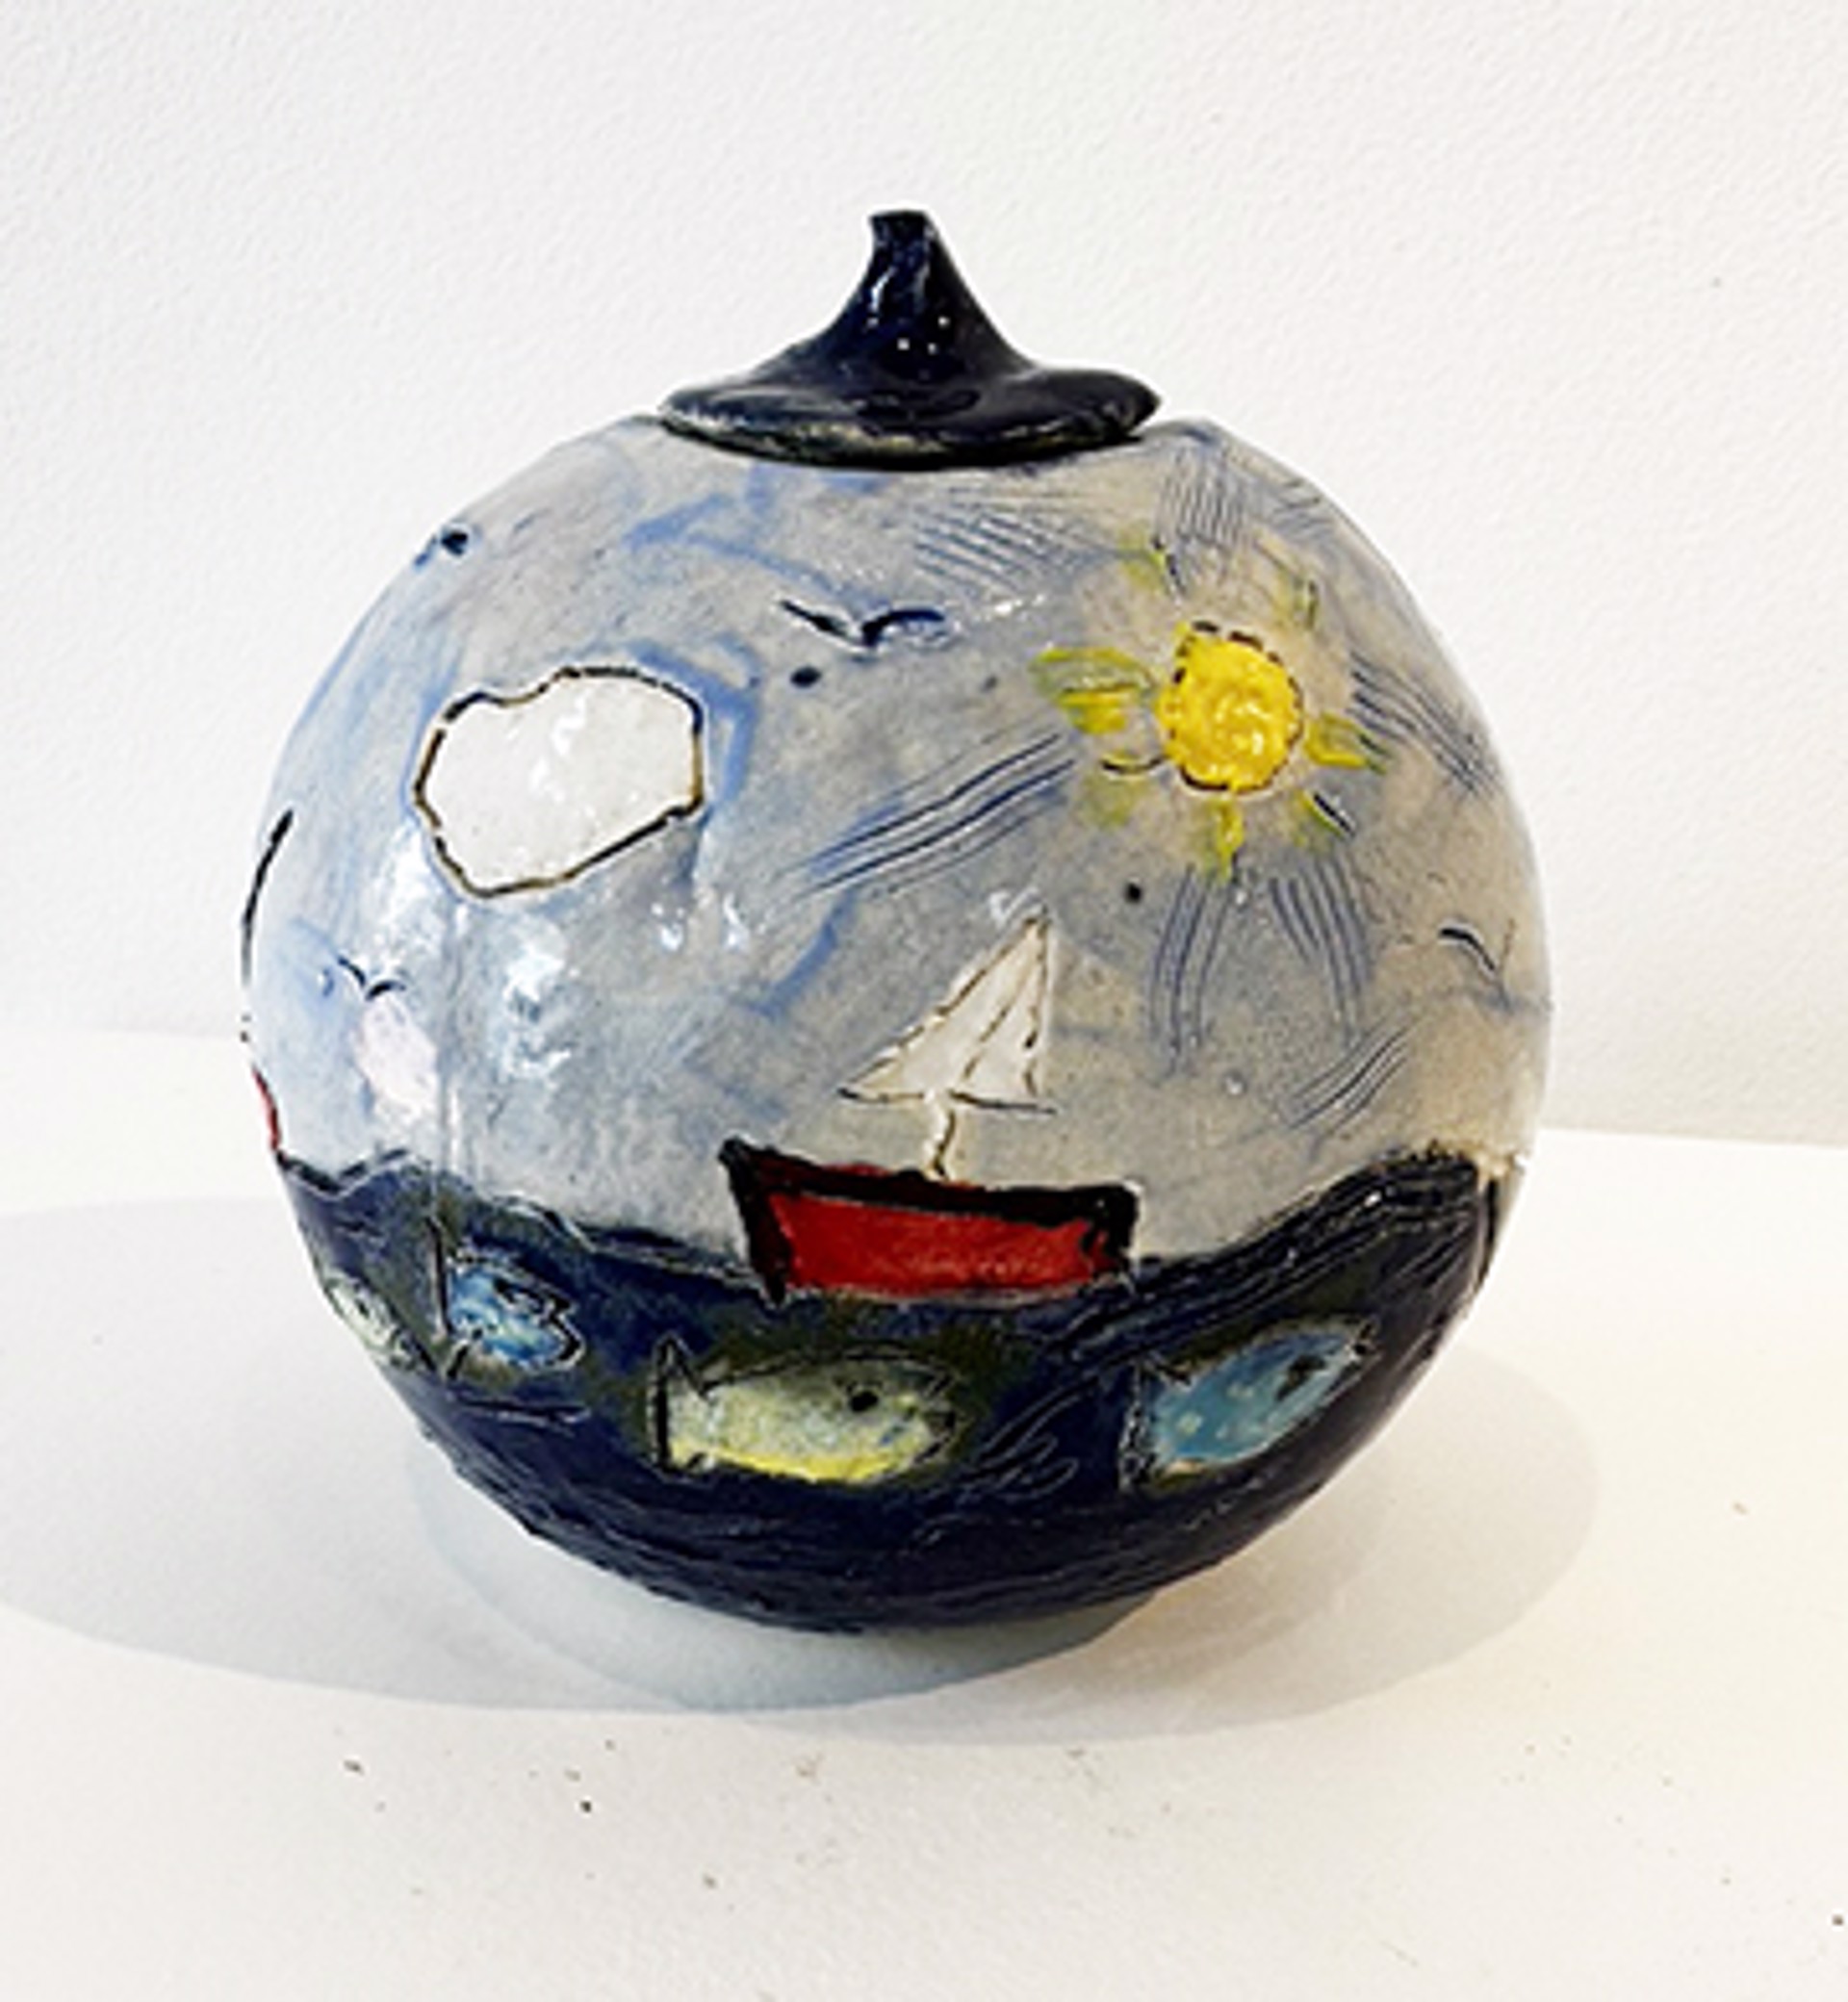 Village Series #4 Vessel Small by Marian Roth